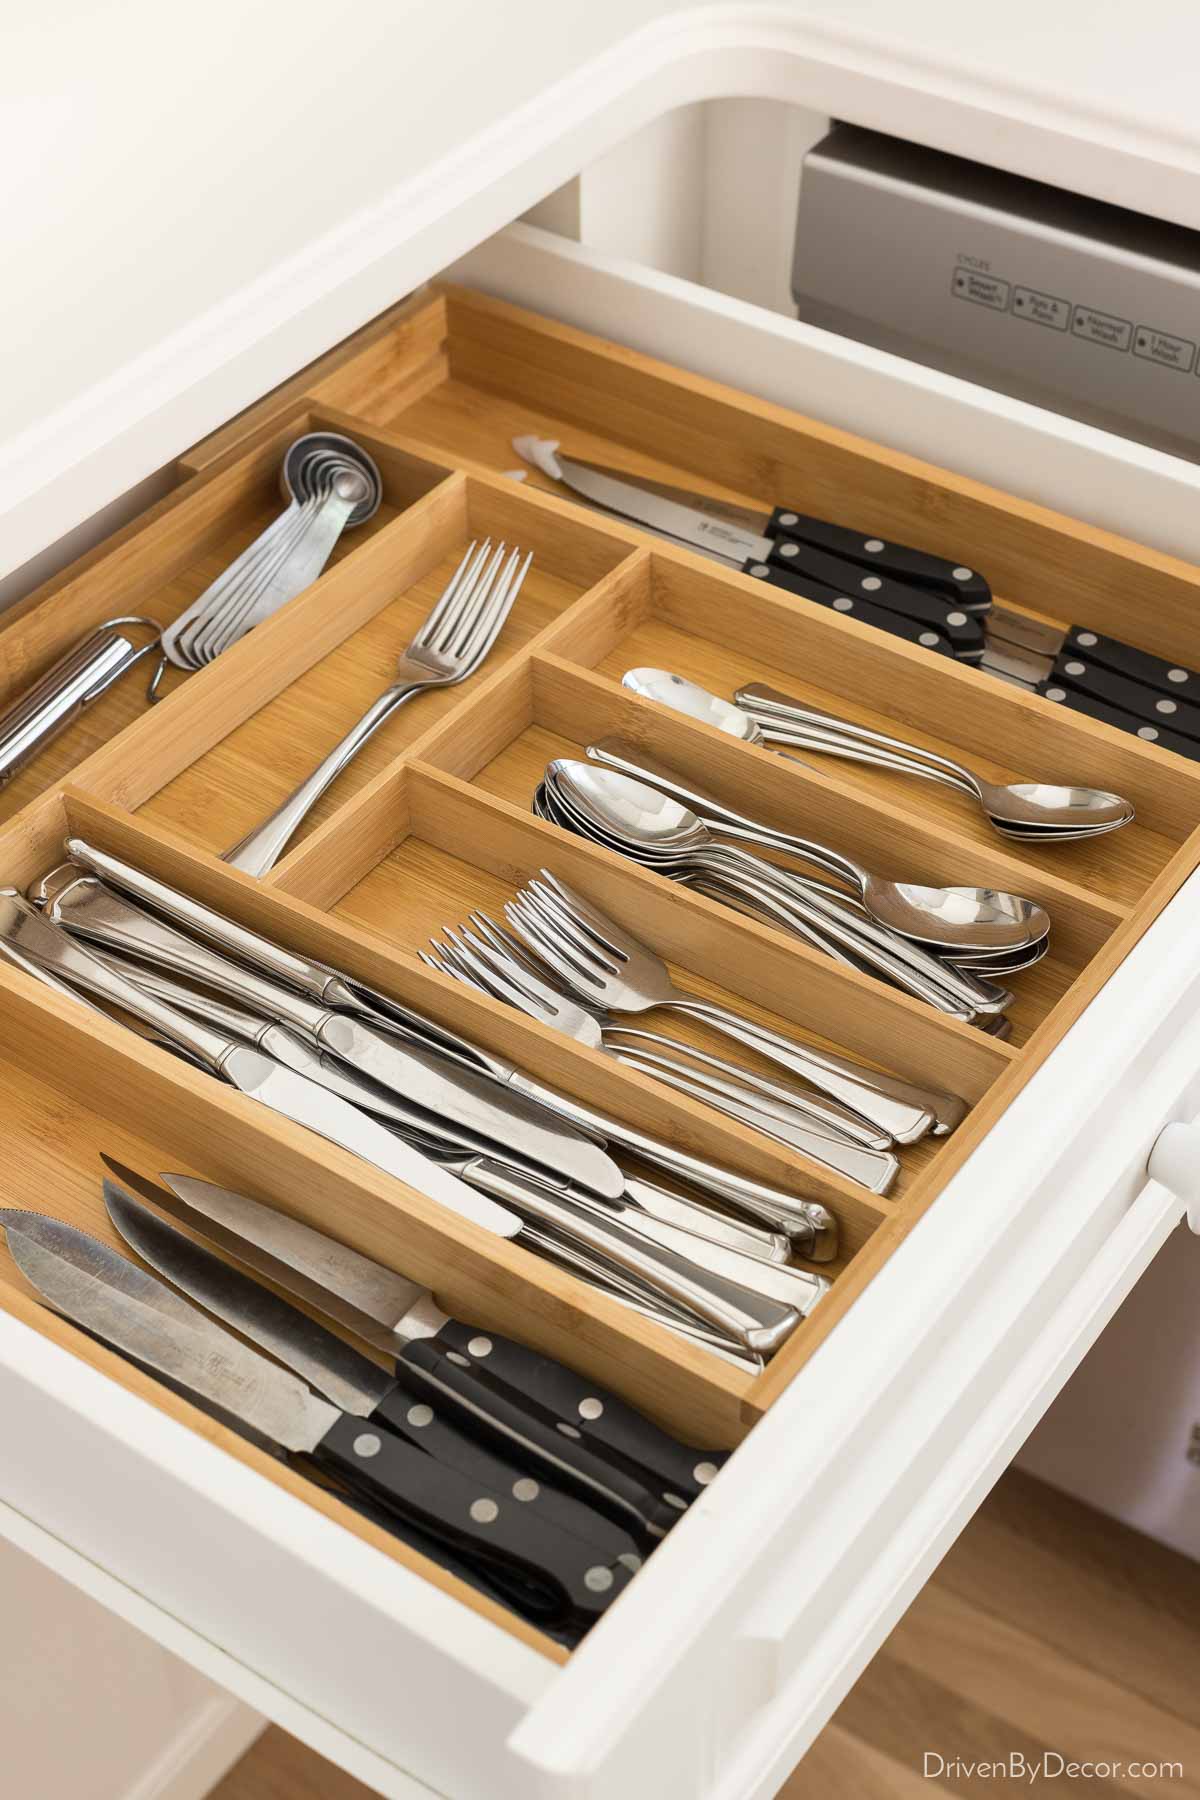 Expandable bamboo kitchen drawer organizer for silverware